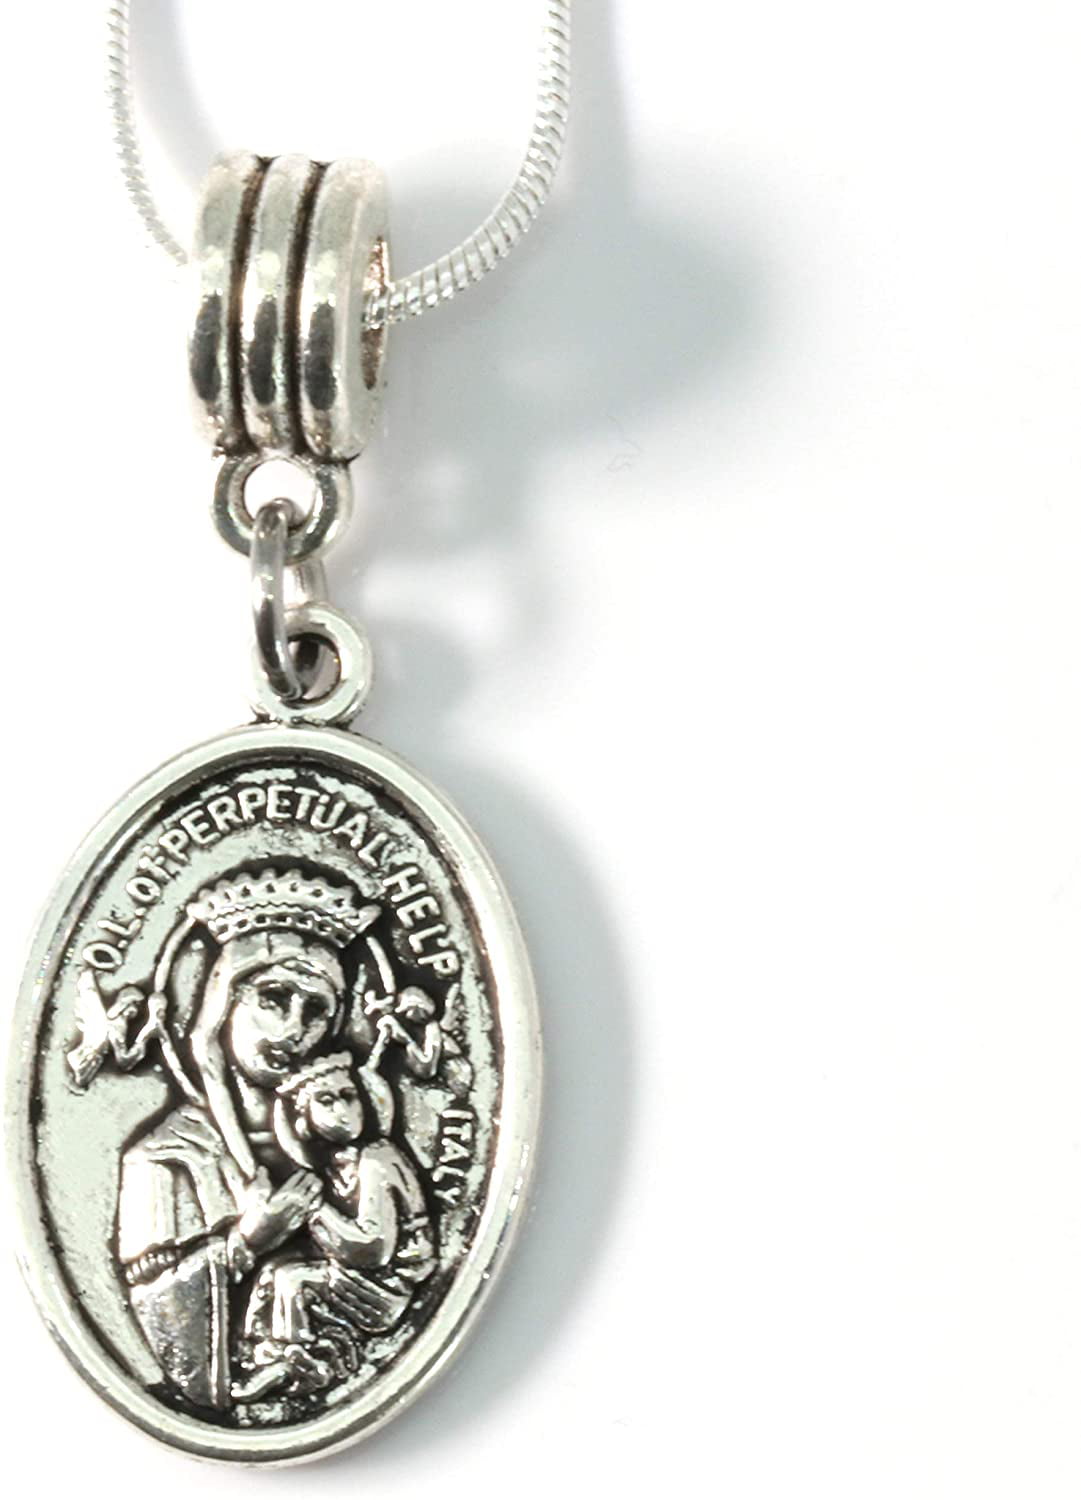 Buy St. Gerard Medal and Chain, Sterling Silver, Patron Saint of Expectant  Mothers, Pregnancy, Fertility & Safe Deliveries. Catholic Saint Gerard  Majella Patron Saint of Childbirth, Expectant Mothers, Pregnant Women,  Fertility, Pregnancy,